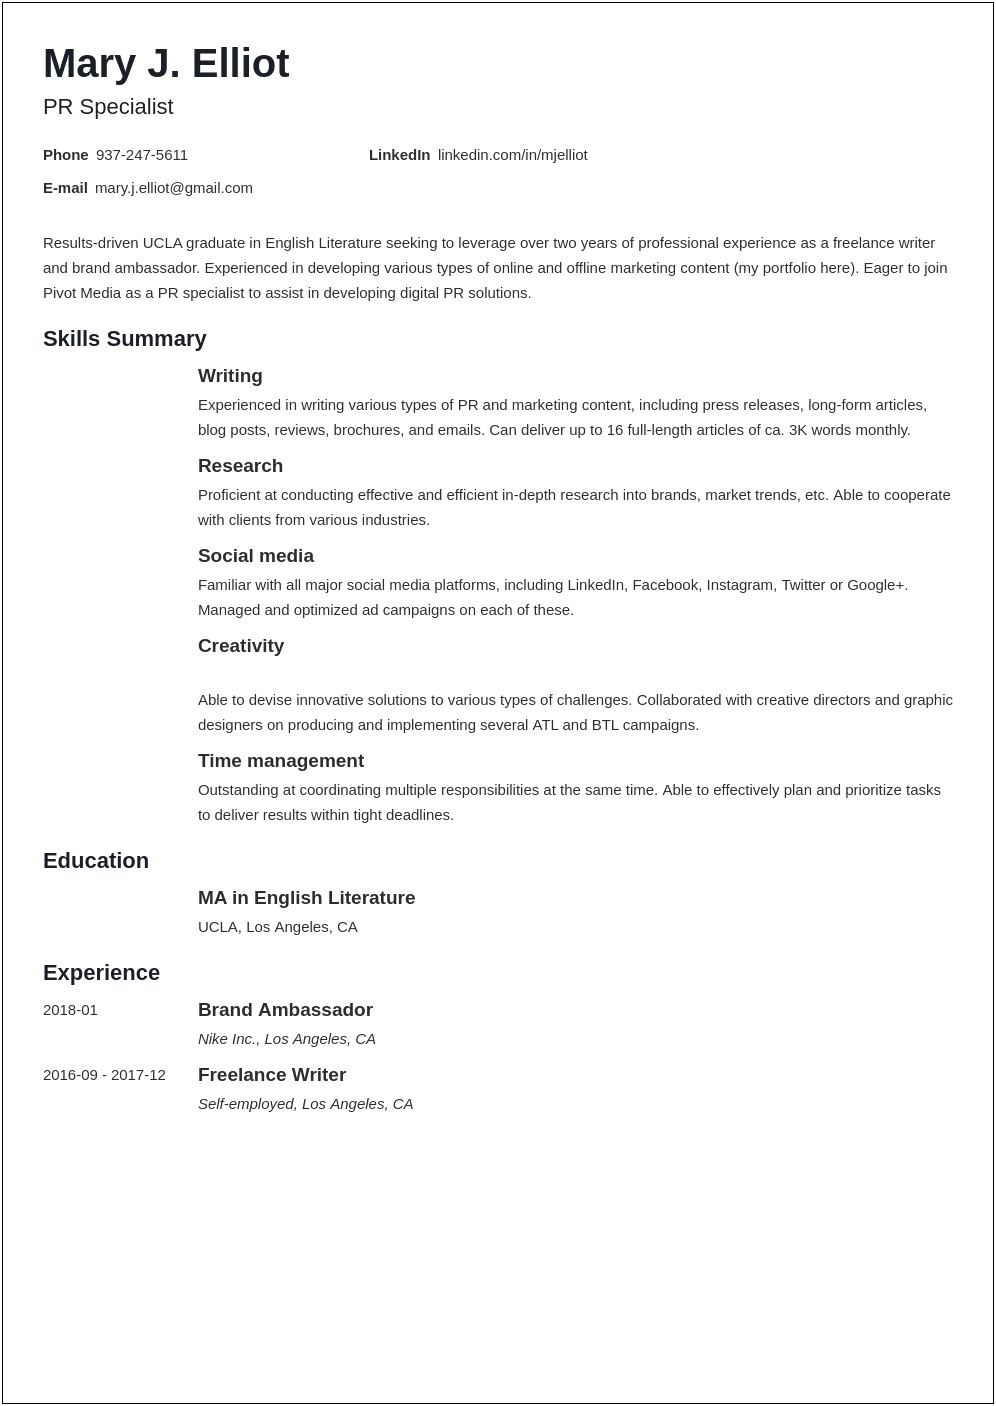 Samples Of Functional Resumes With Objectives